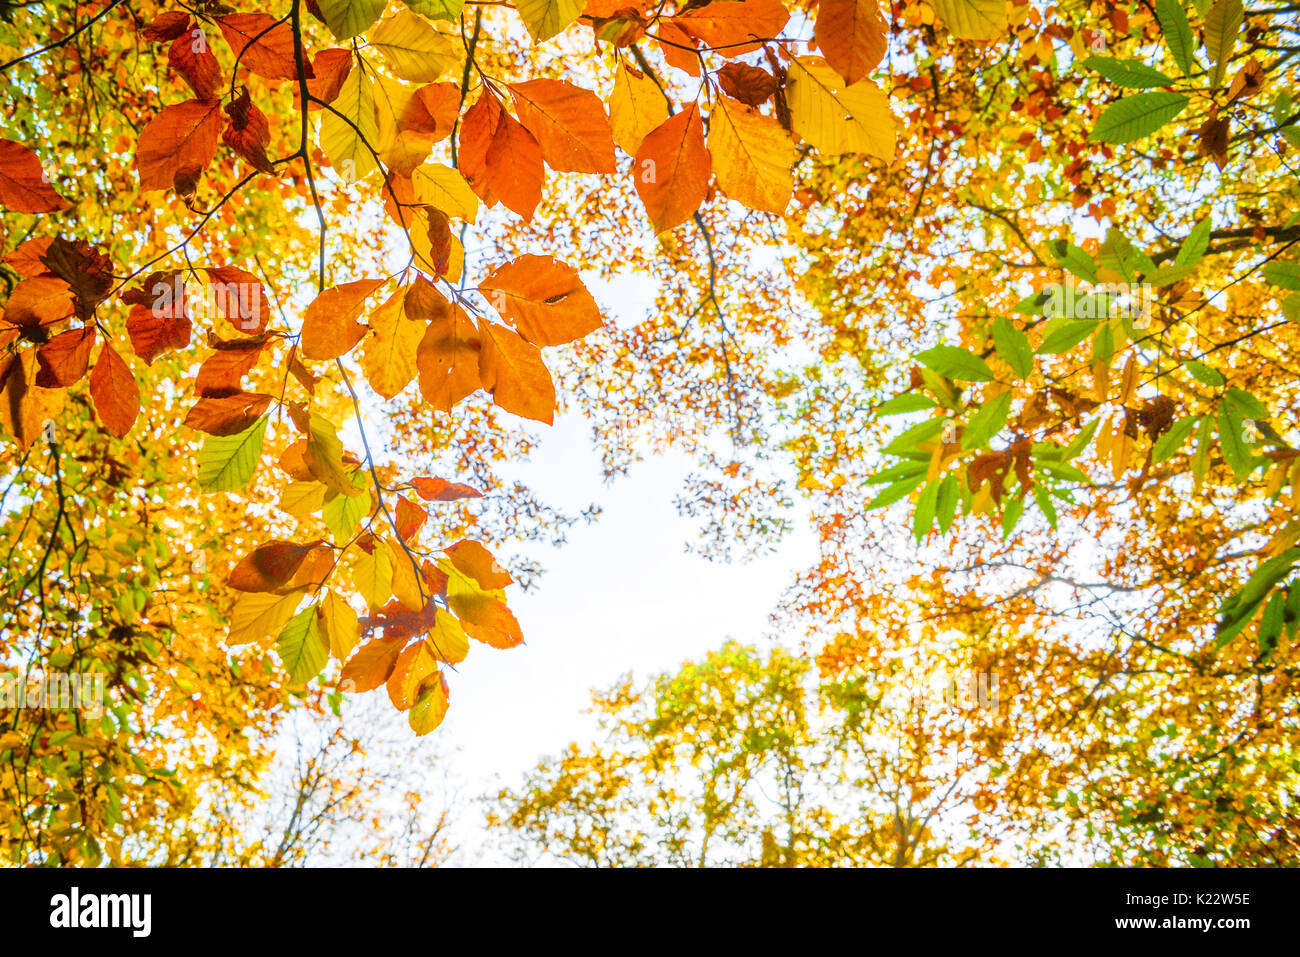 Autumn leaves against the sky, looking up in a forest in autumn Stock Photo